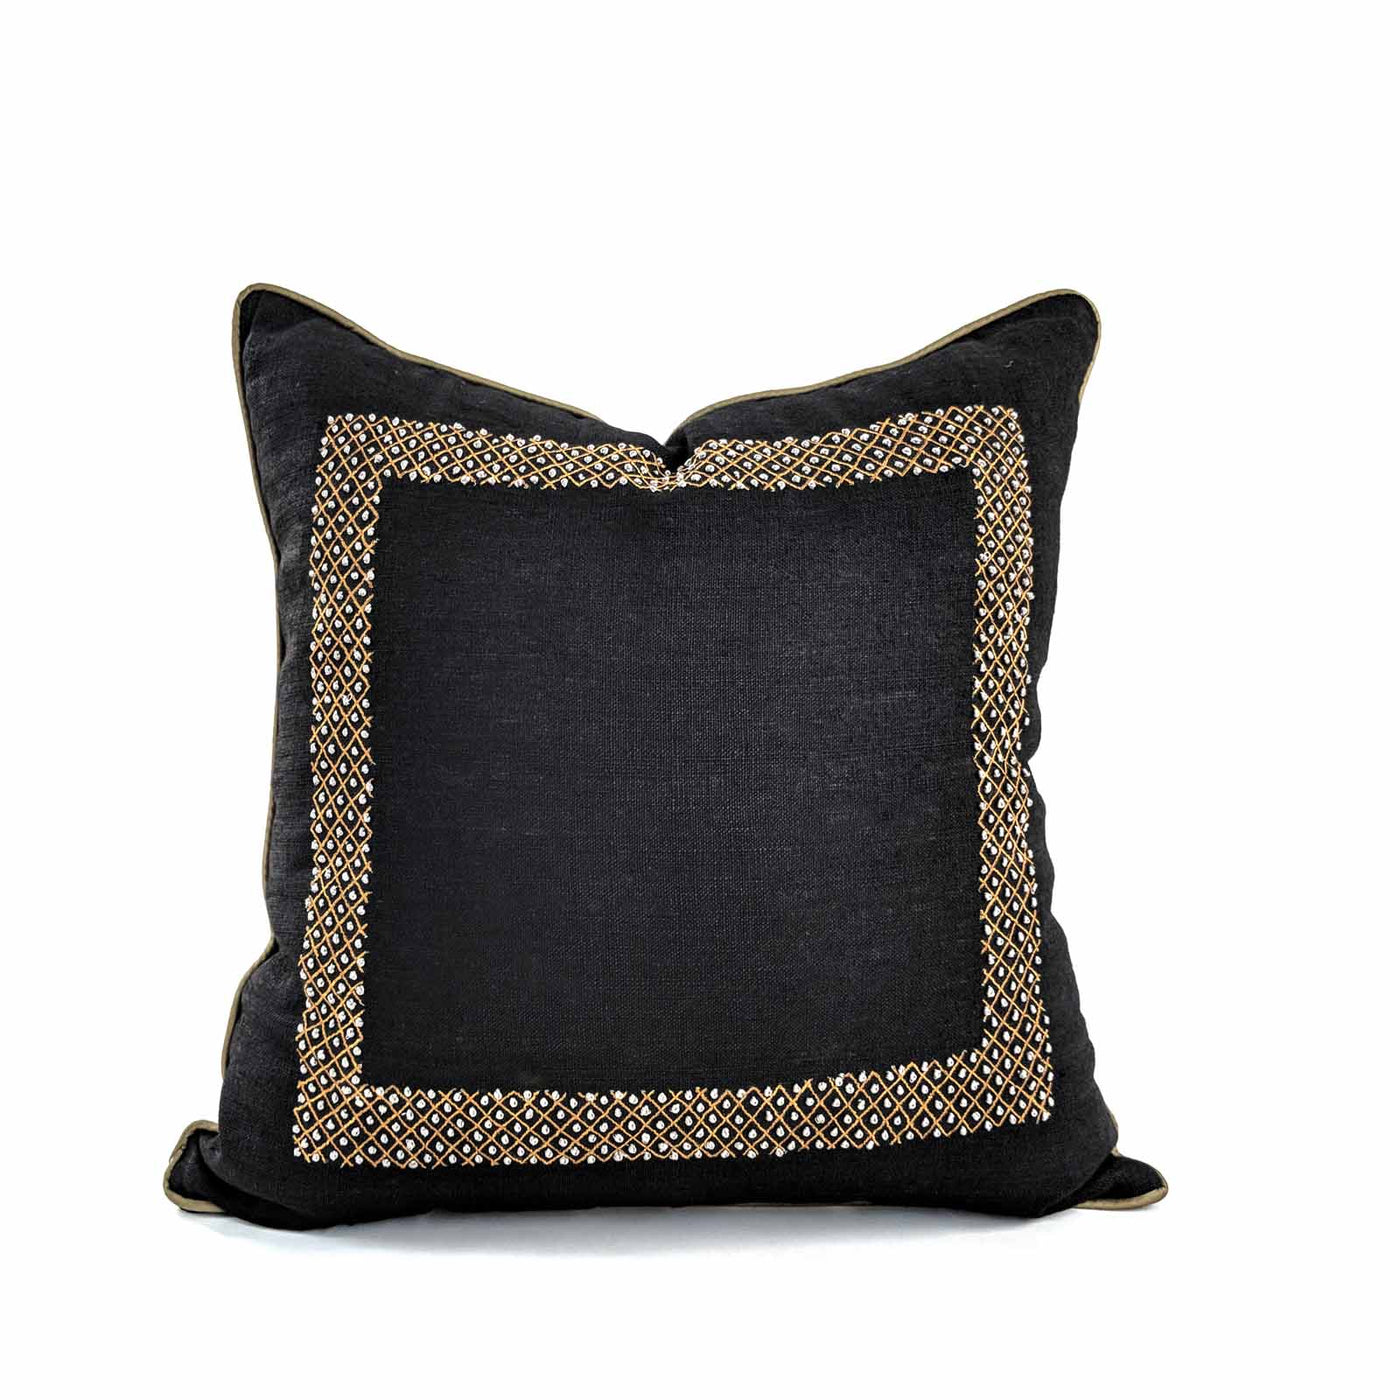 The Fort collection brings a restoration flavor to these luxury products with hand dabka work, french knots and unifinished borderlines